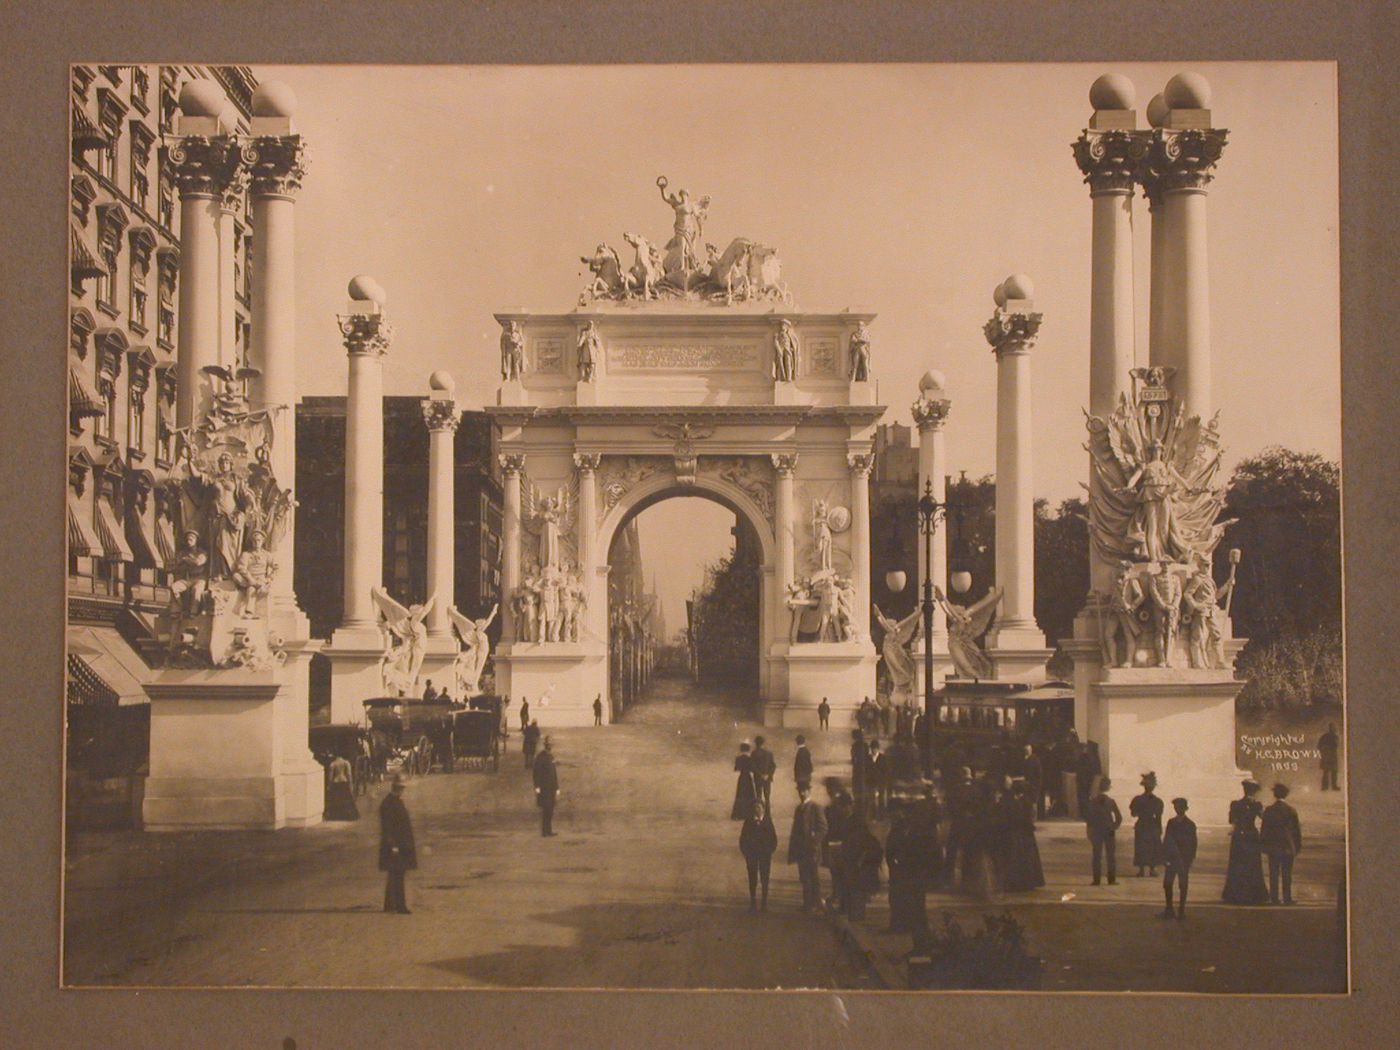 23re St. and 5th Avenue: triumphant arch dedicated to Navy and Admiral, New York City, New York, 1899